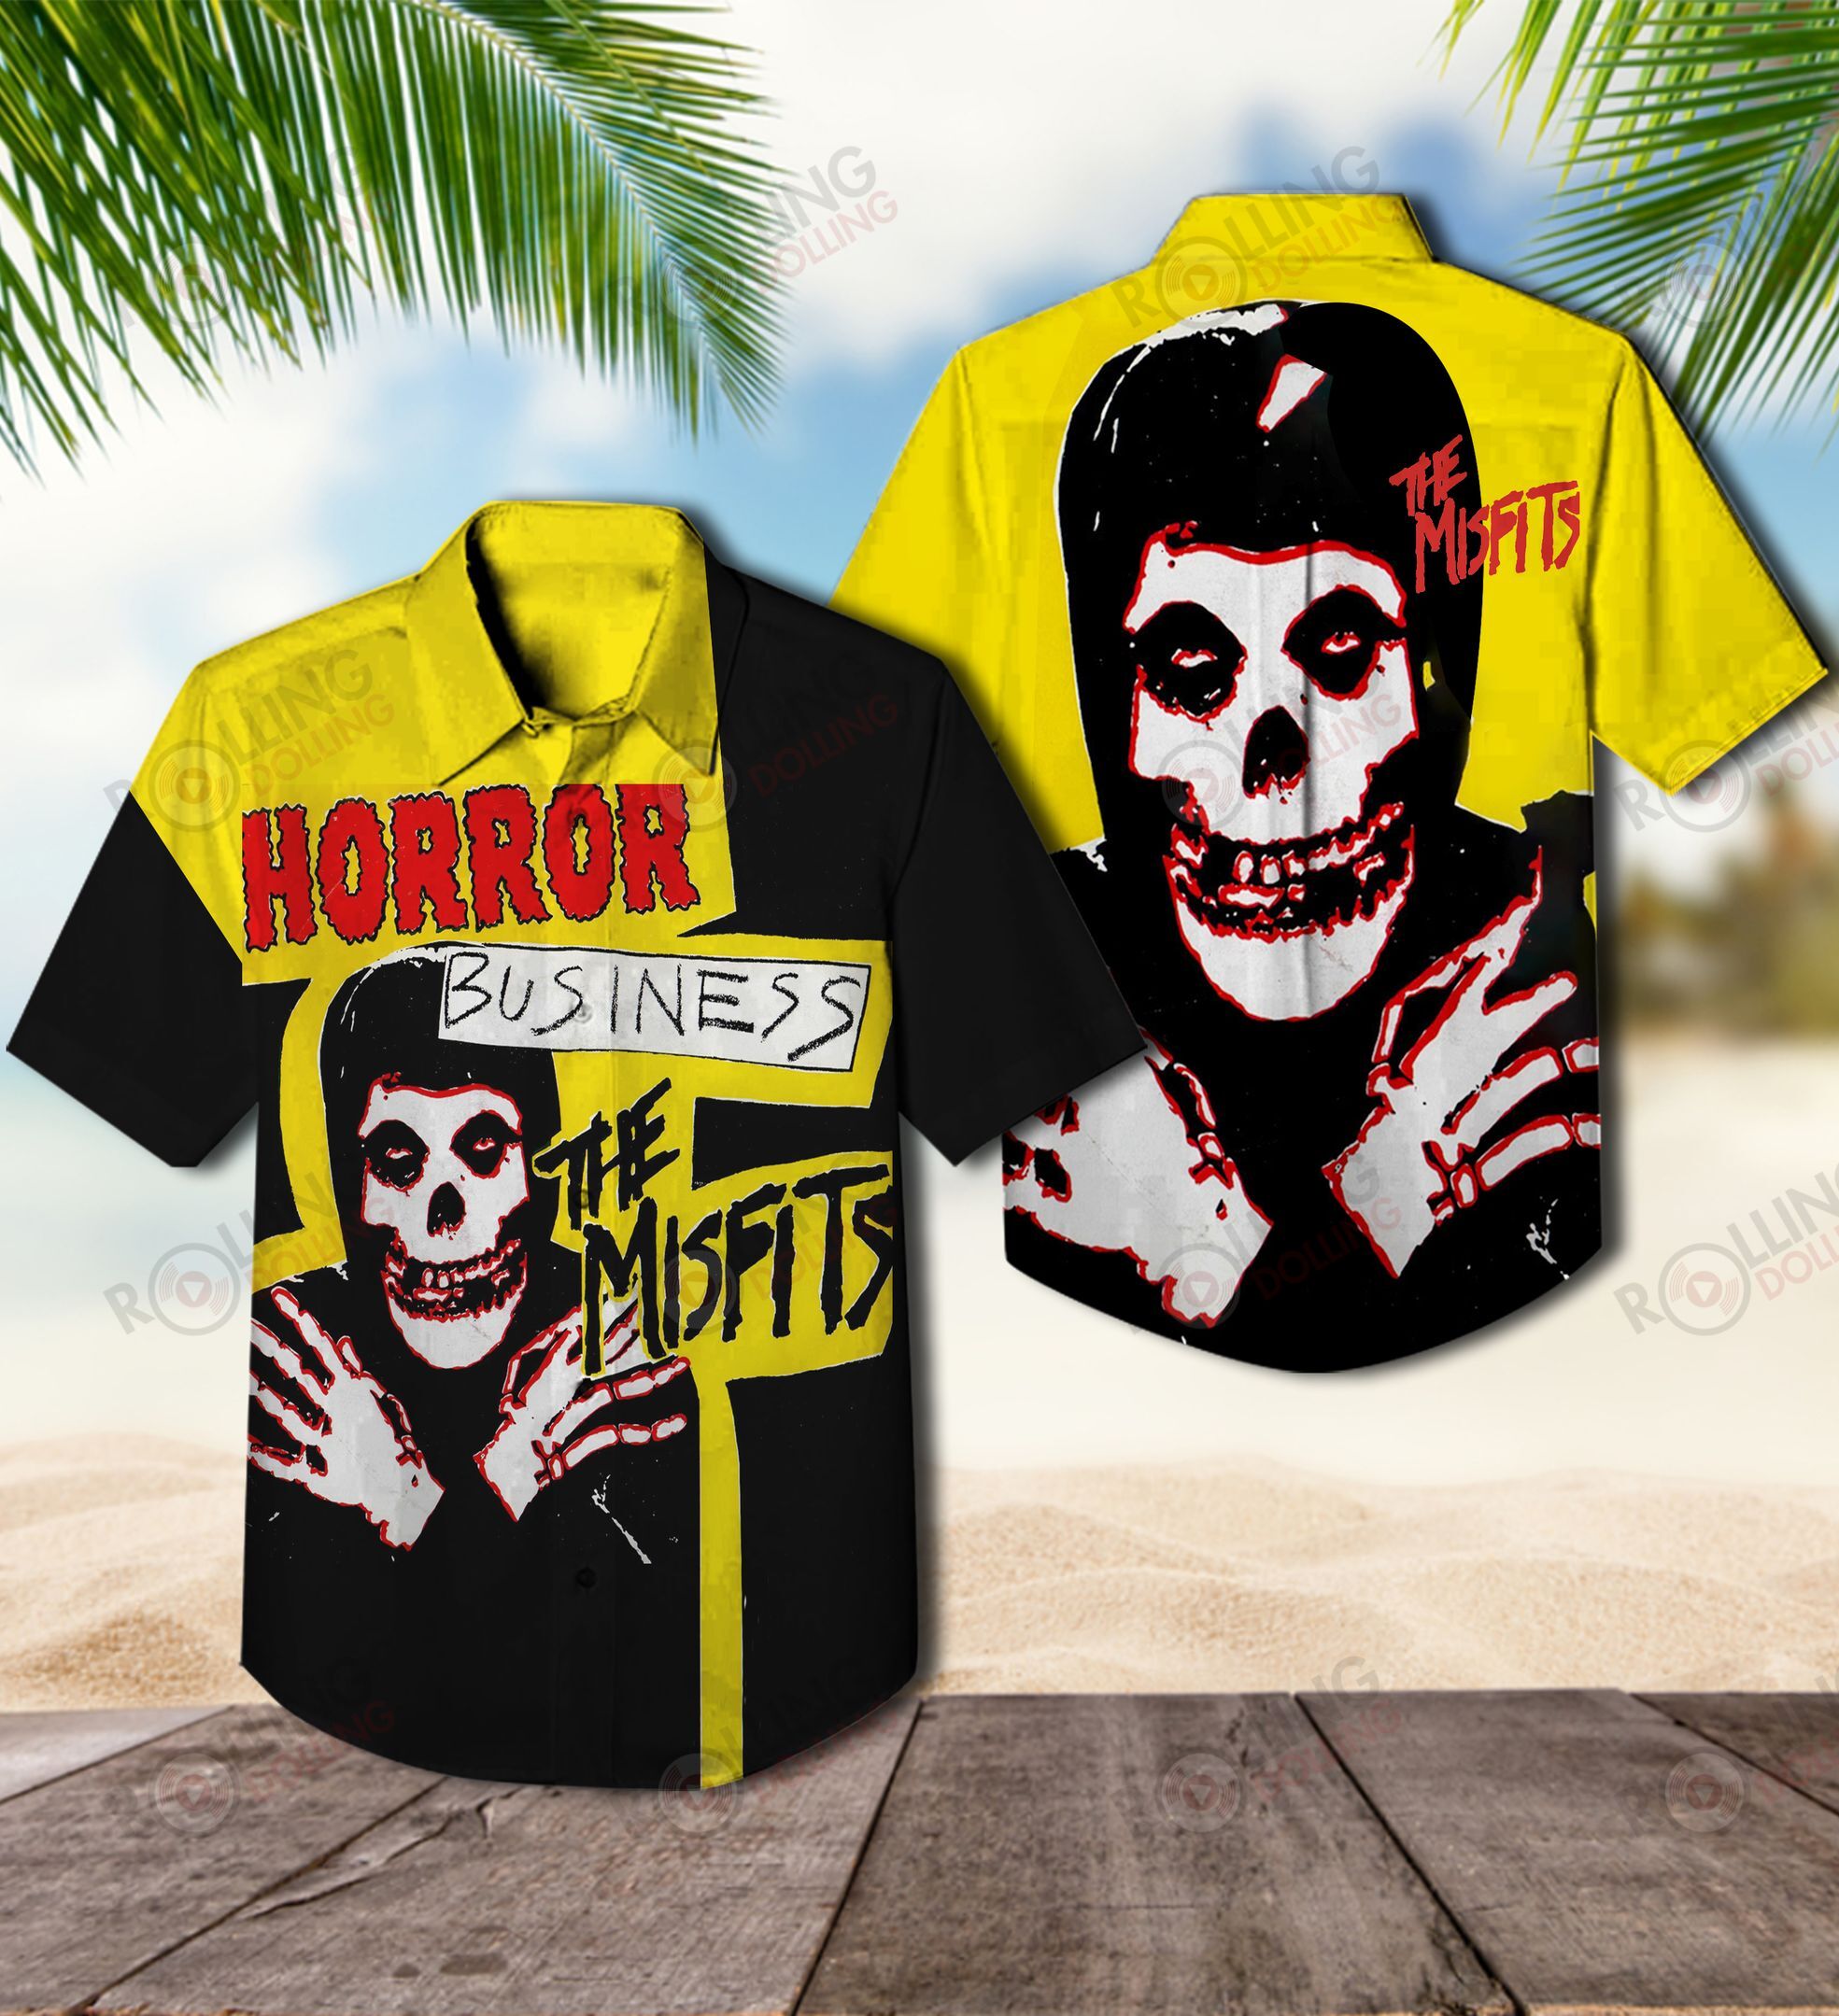 The Hawaiian Shirt is a popular shirt that is worn by Rock band fans 37